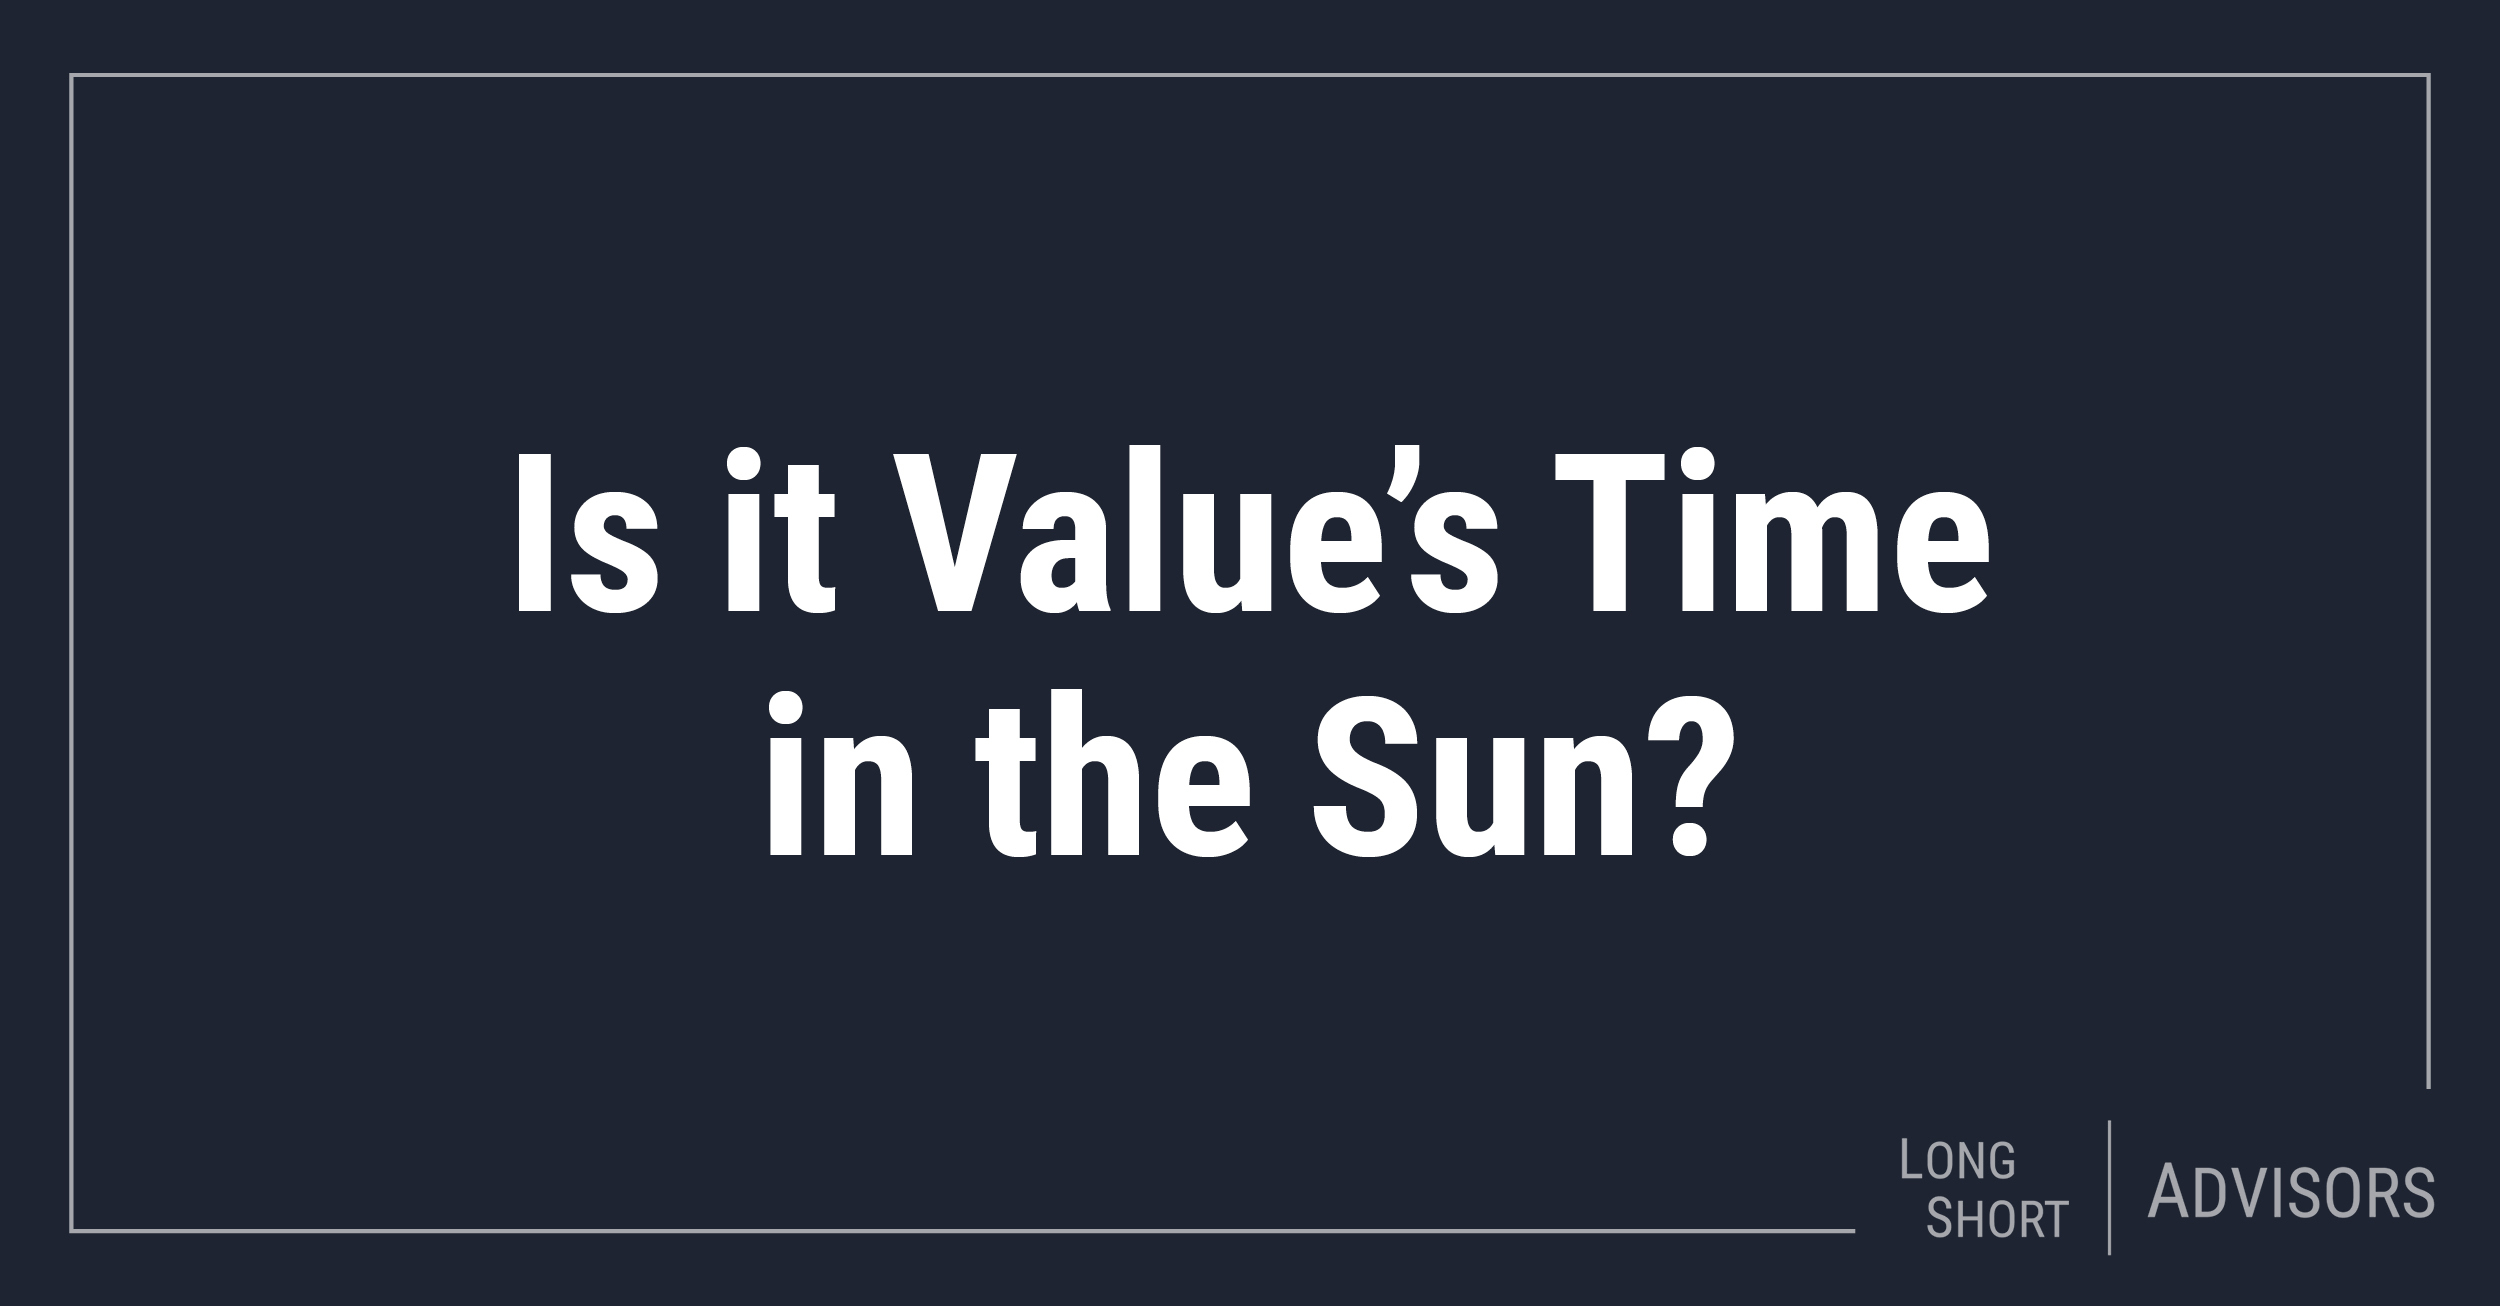 Is it Value’s Time in the Sun?